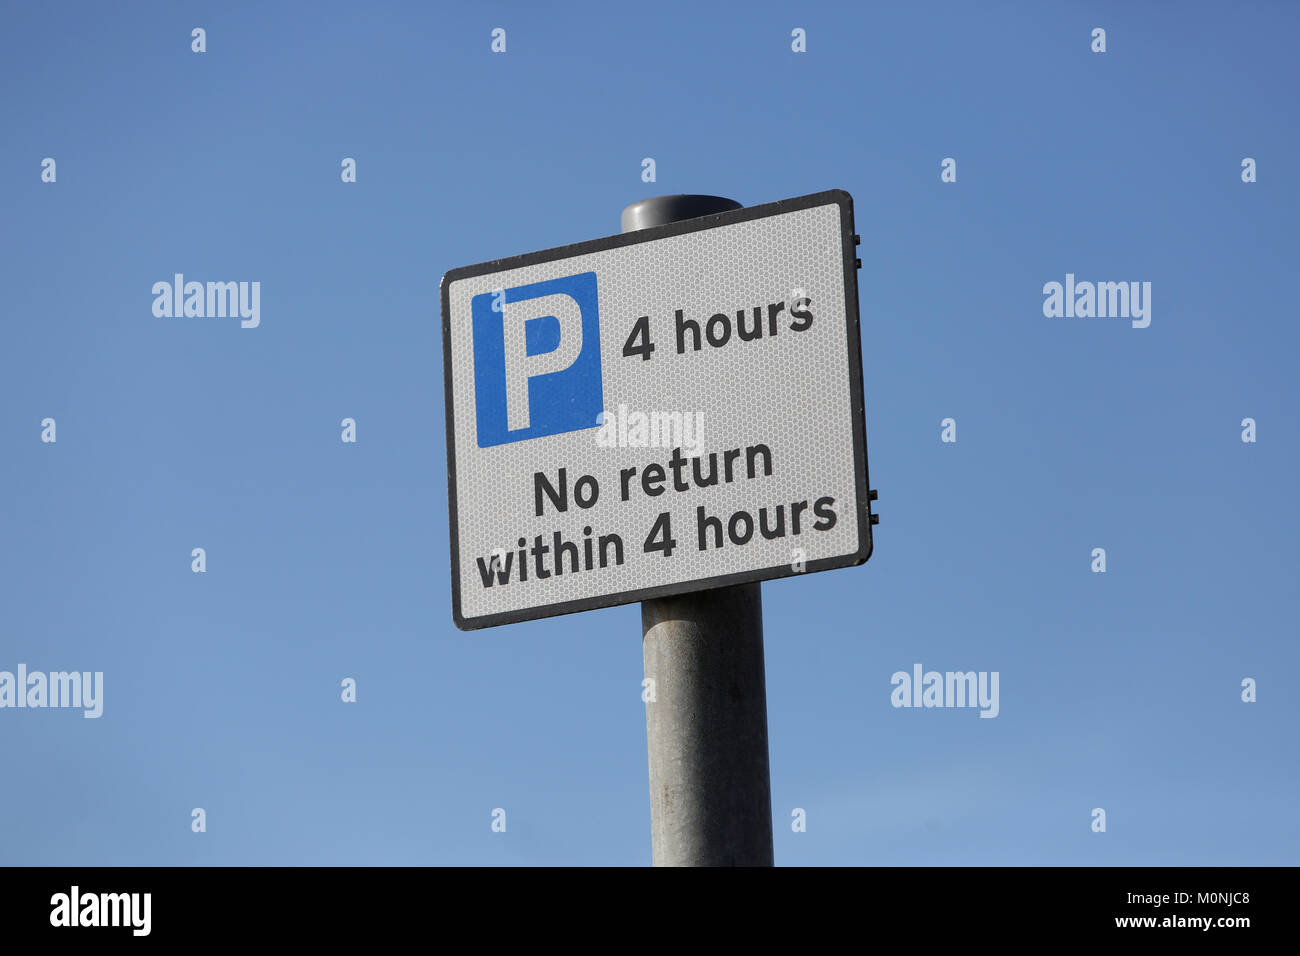 A 4 hours parking sign on a post in London, UK. Stock Photo